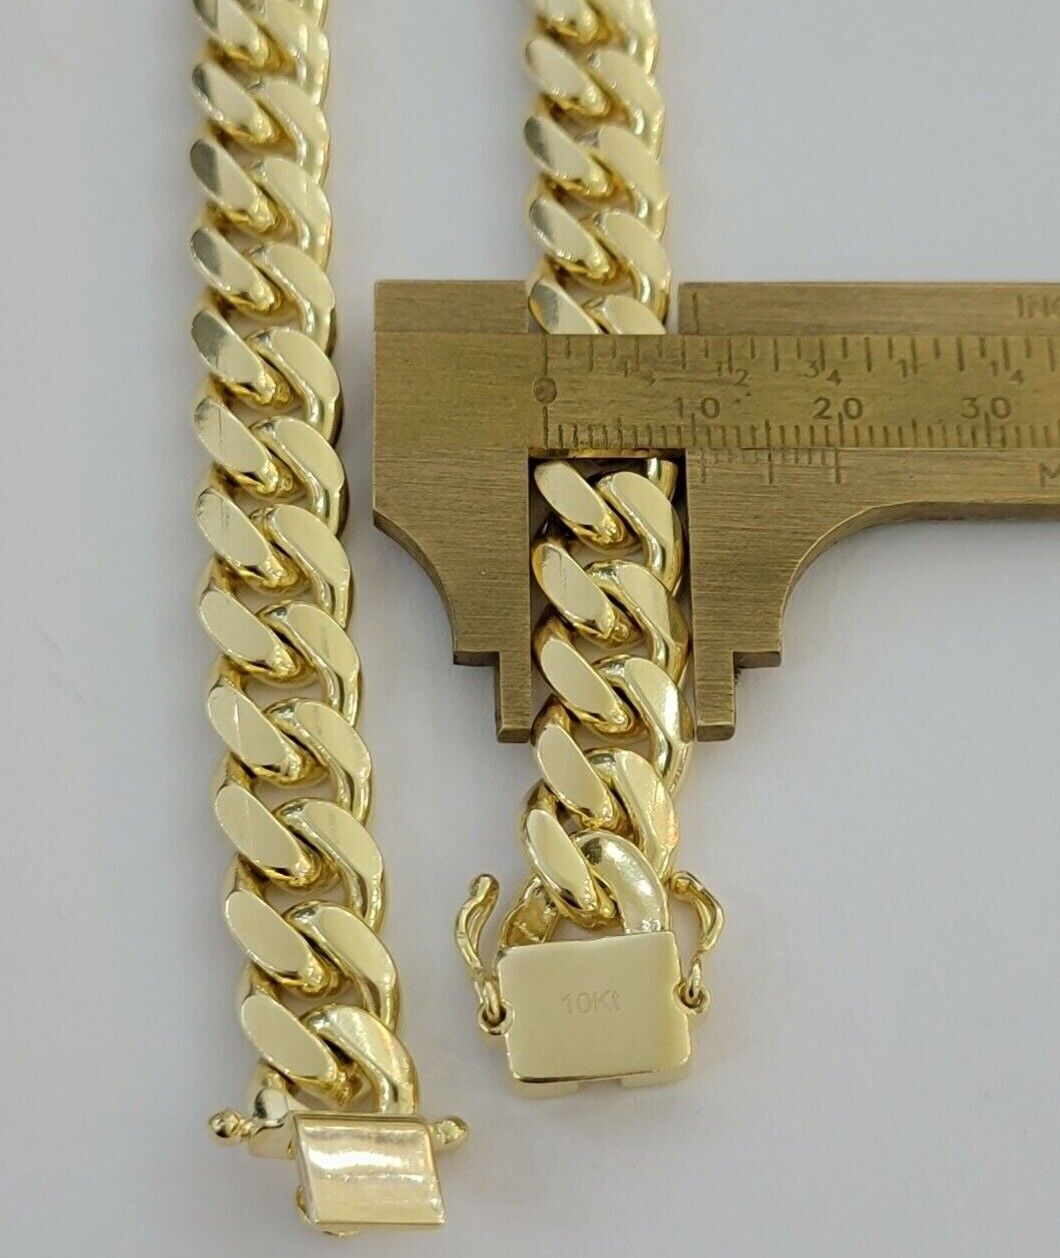 Real 10k Yellow Gold Chain 10mm Solid Miami Cuban Link Necklace 20 Inch Choker